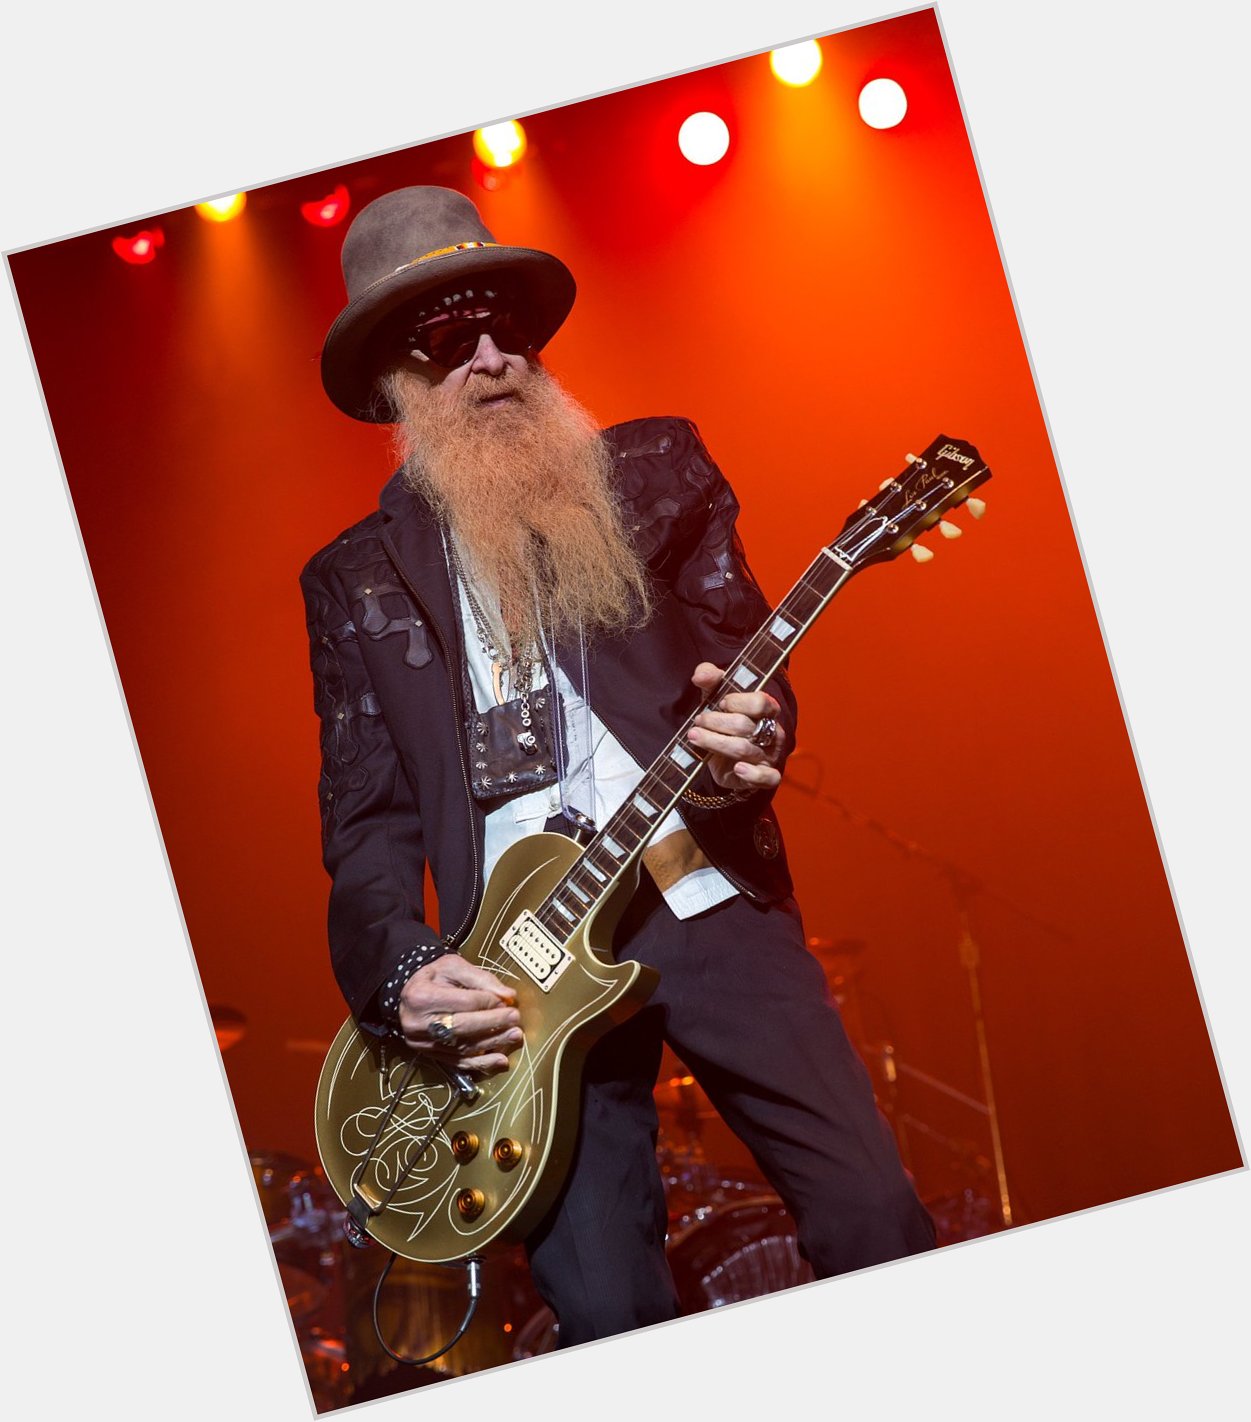 Happy 70th Birthday to Billy Gibbons! The guitarist and lead singer of ZZ Top. 